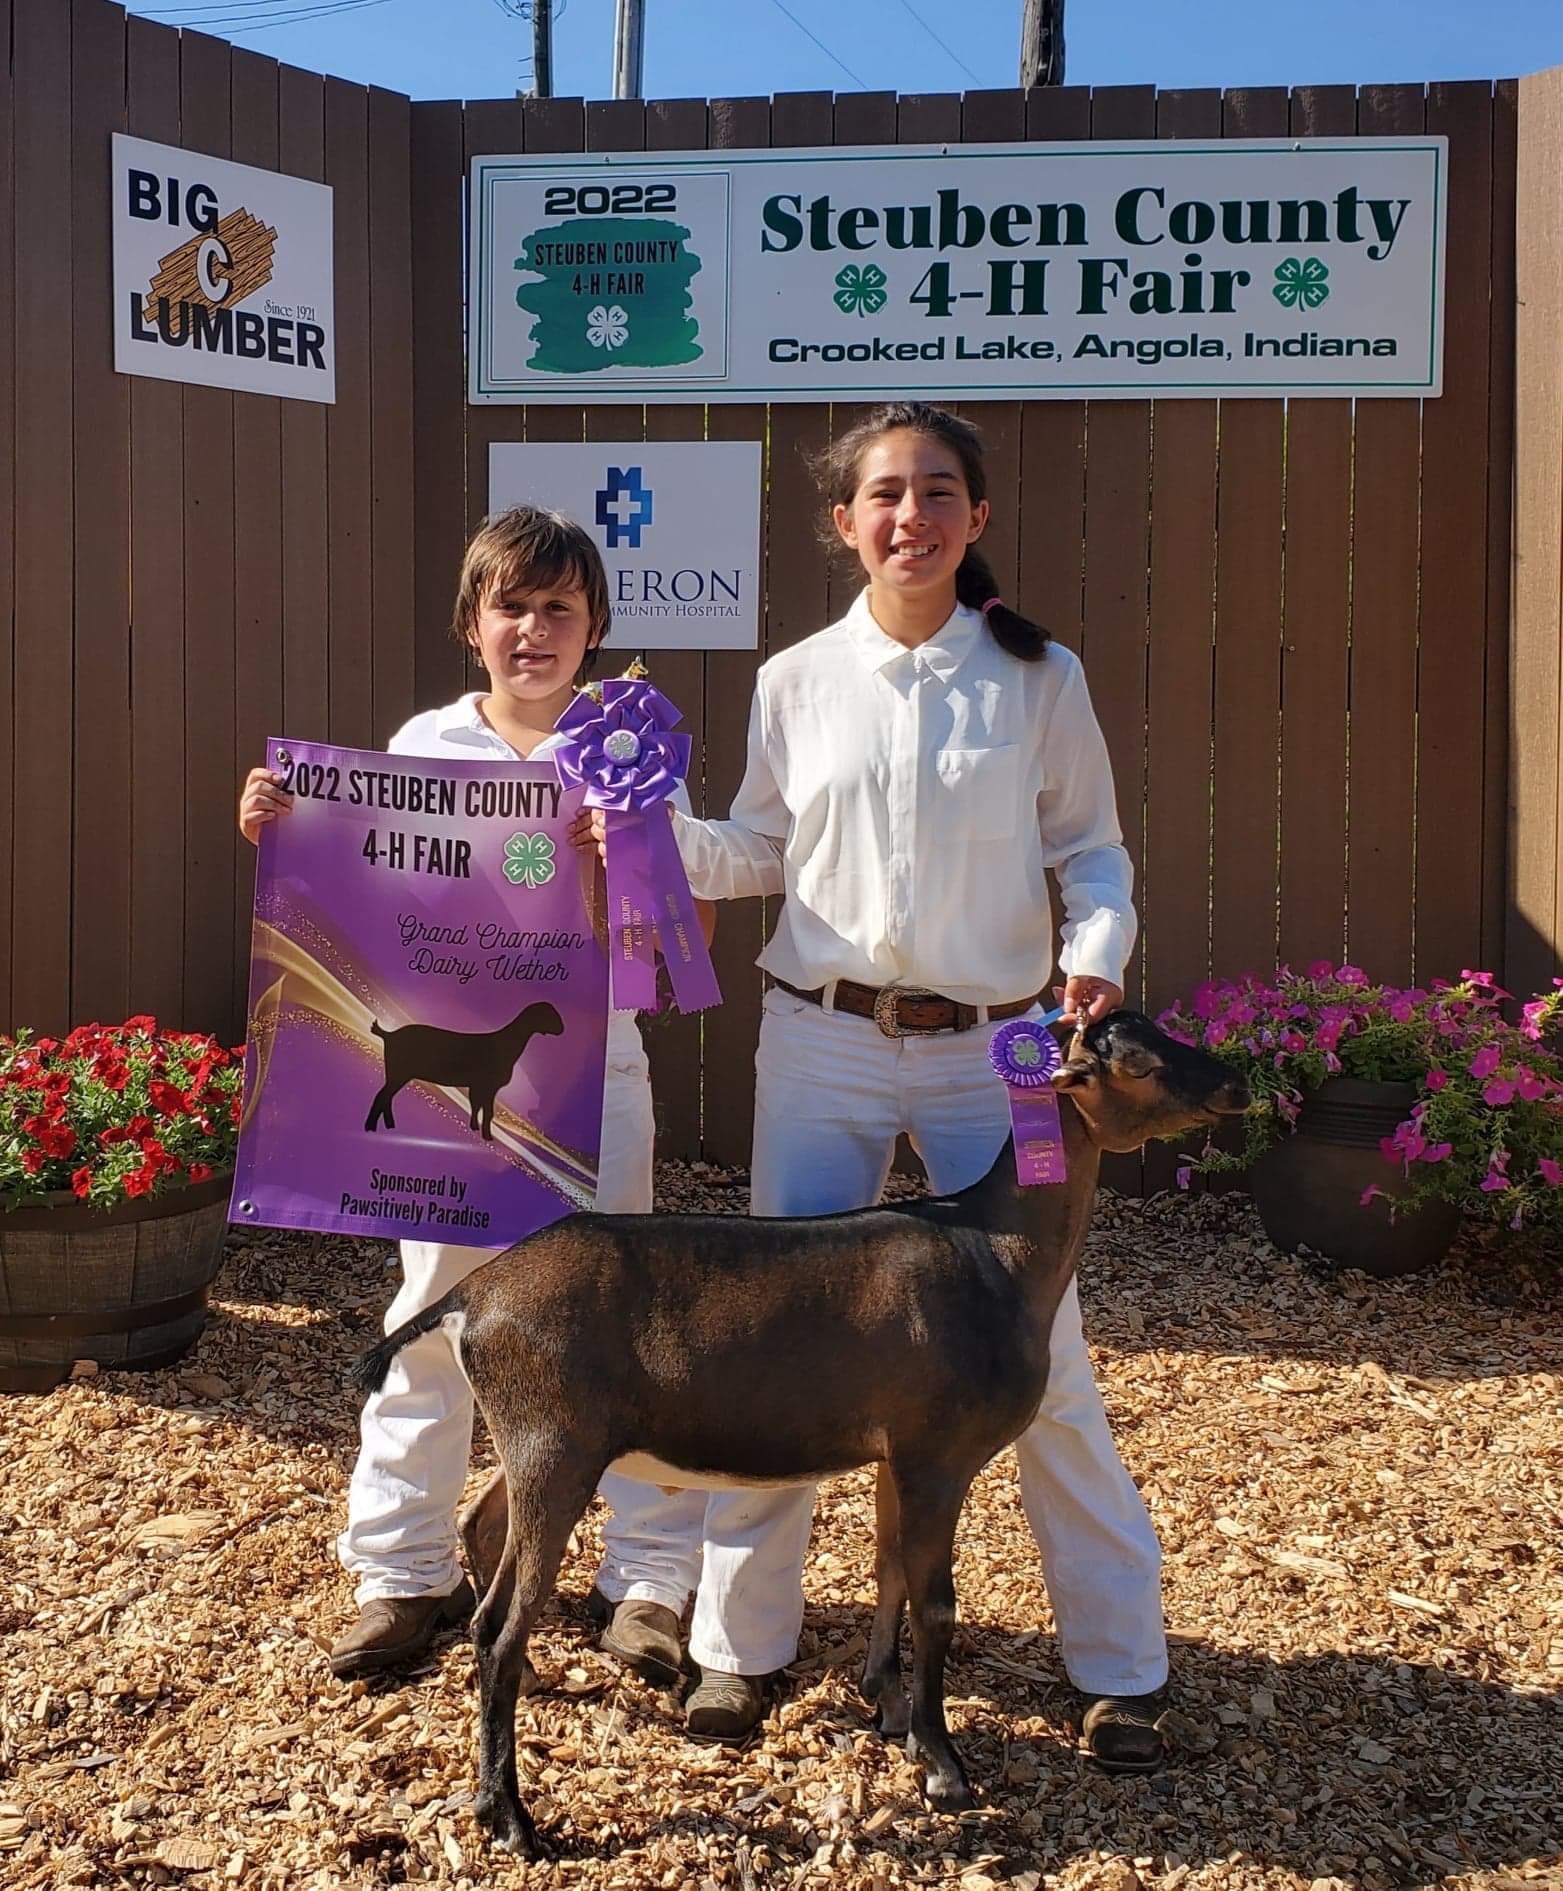 Grand Champion Dairy Wether, 2022 Steuben County 4-H Fair